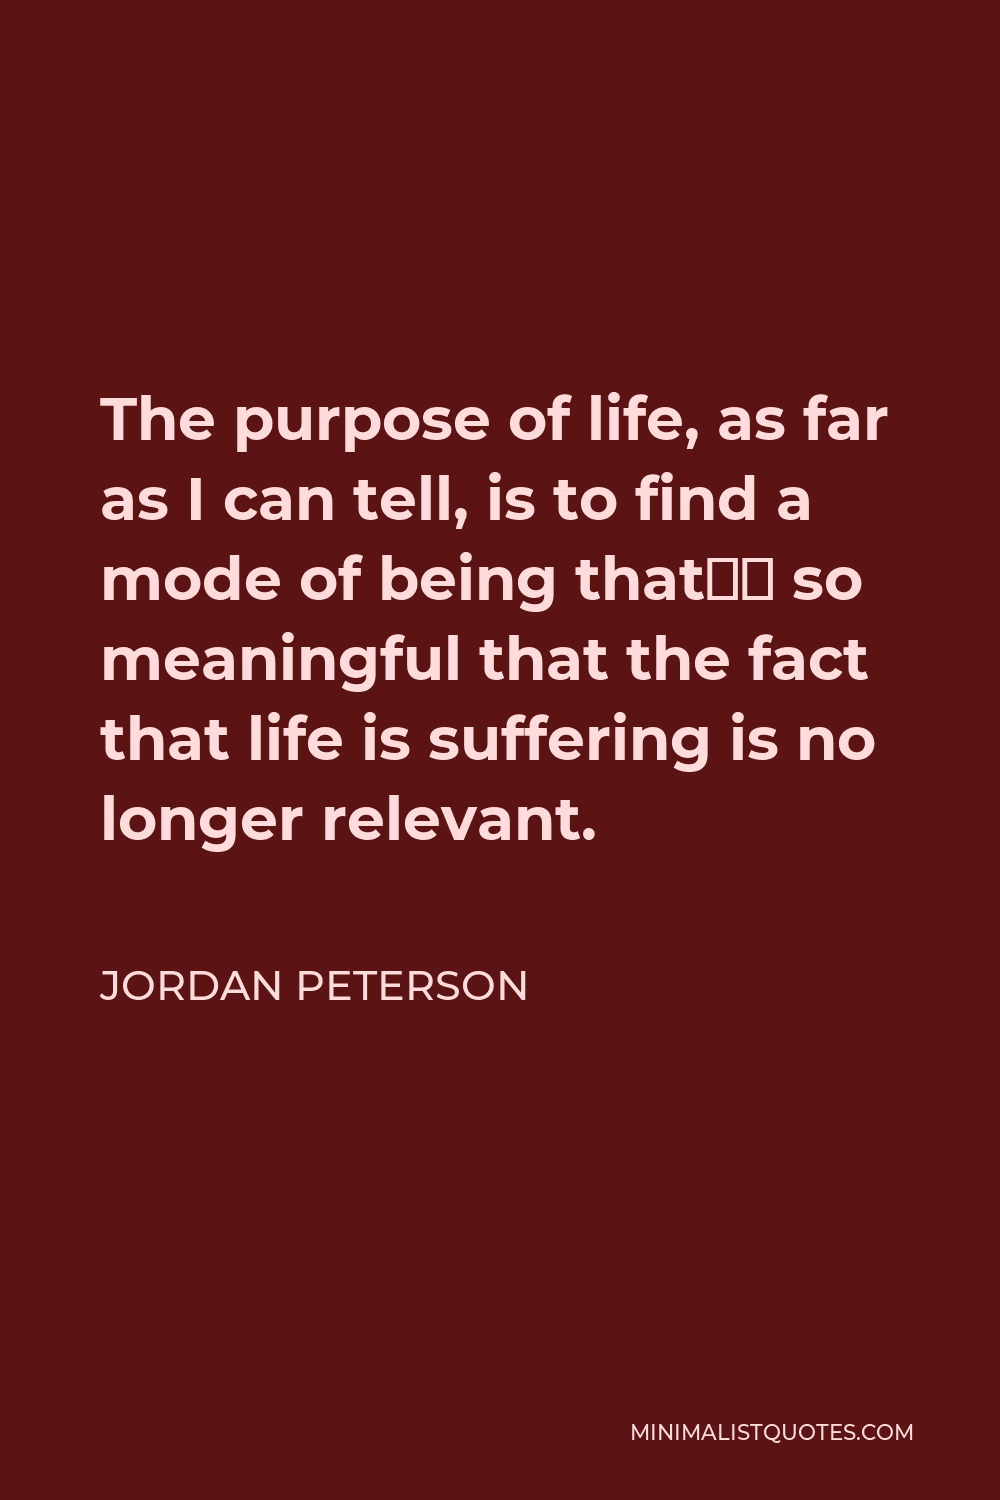 Jordan Peterson Quote - The purpose of life, as far as I can tell, is to find a mode of being that’s so meaningful that the fact that life is suffering is no longer relevant.